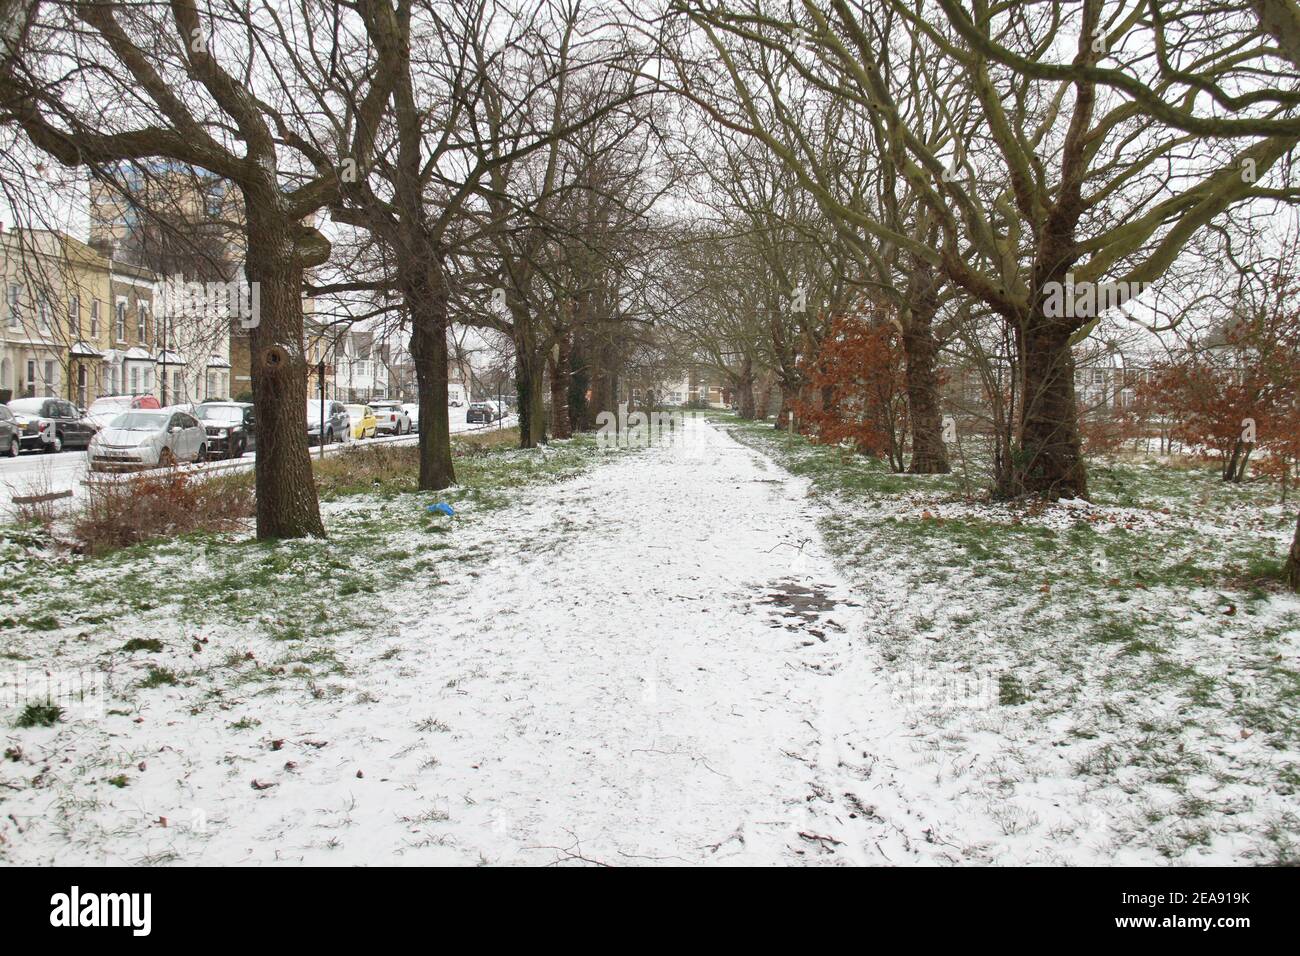 A view of a snow covered walkway on the edge of Wanstead Park in East `London. Heavy snow and ice has brought disruption to parts of the UK, with London receiving around 5cm of snow. Storm Darcy's strong easterly winds have plummeted temperatures in parts of the UK to below minus one. Stock Photo